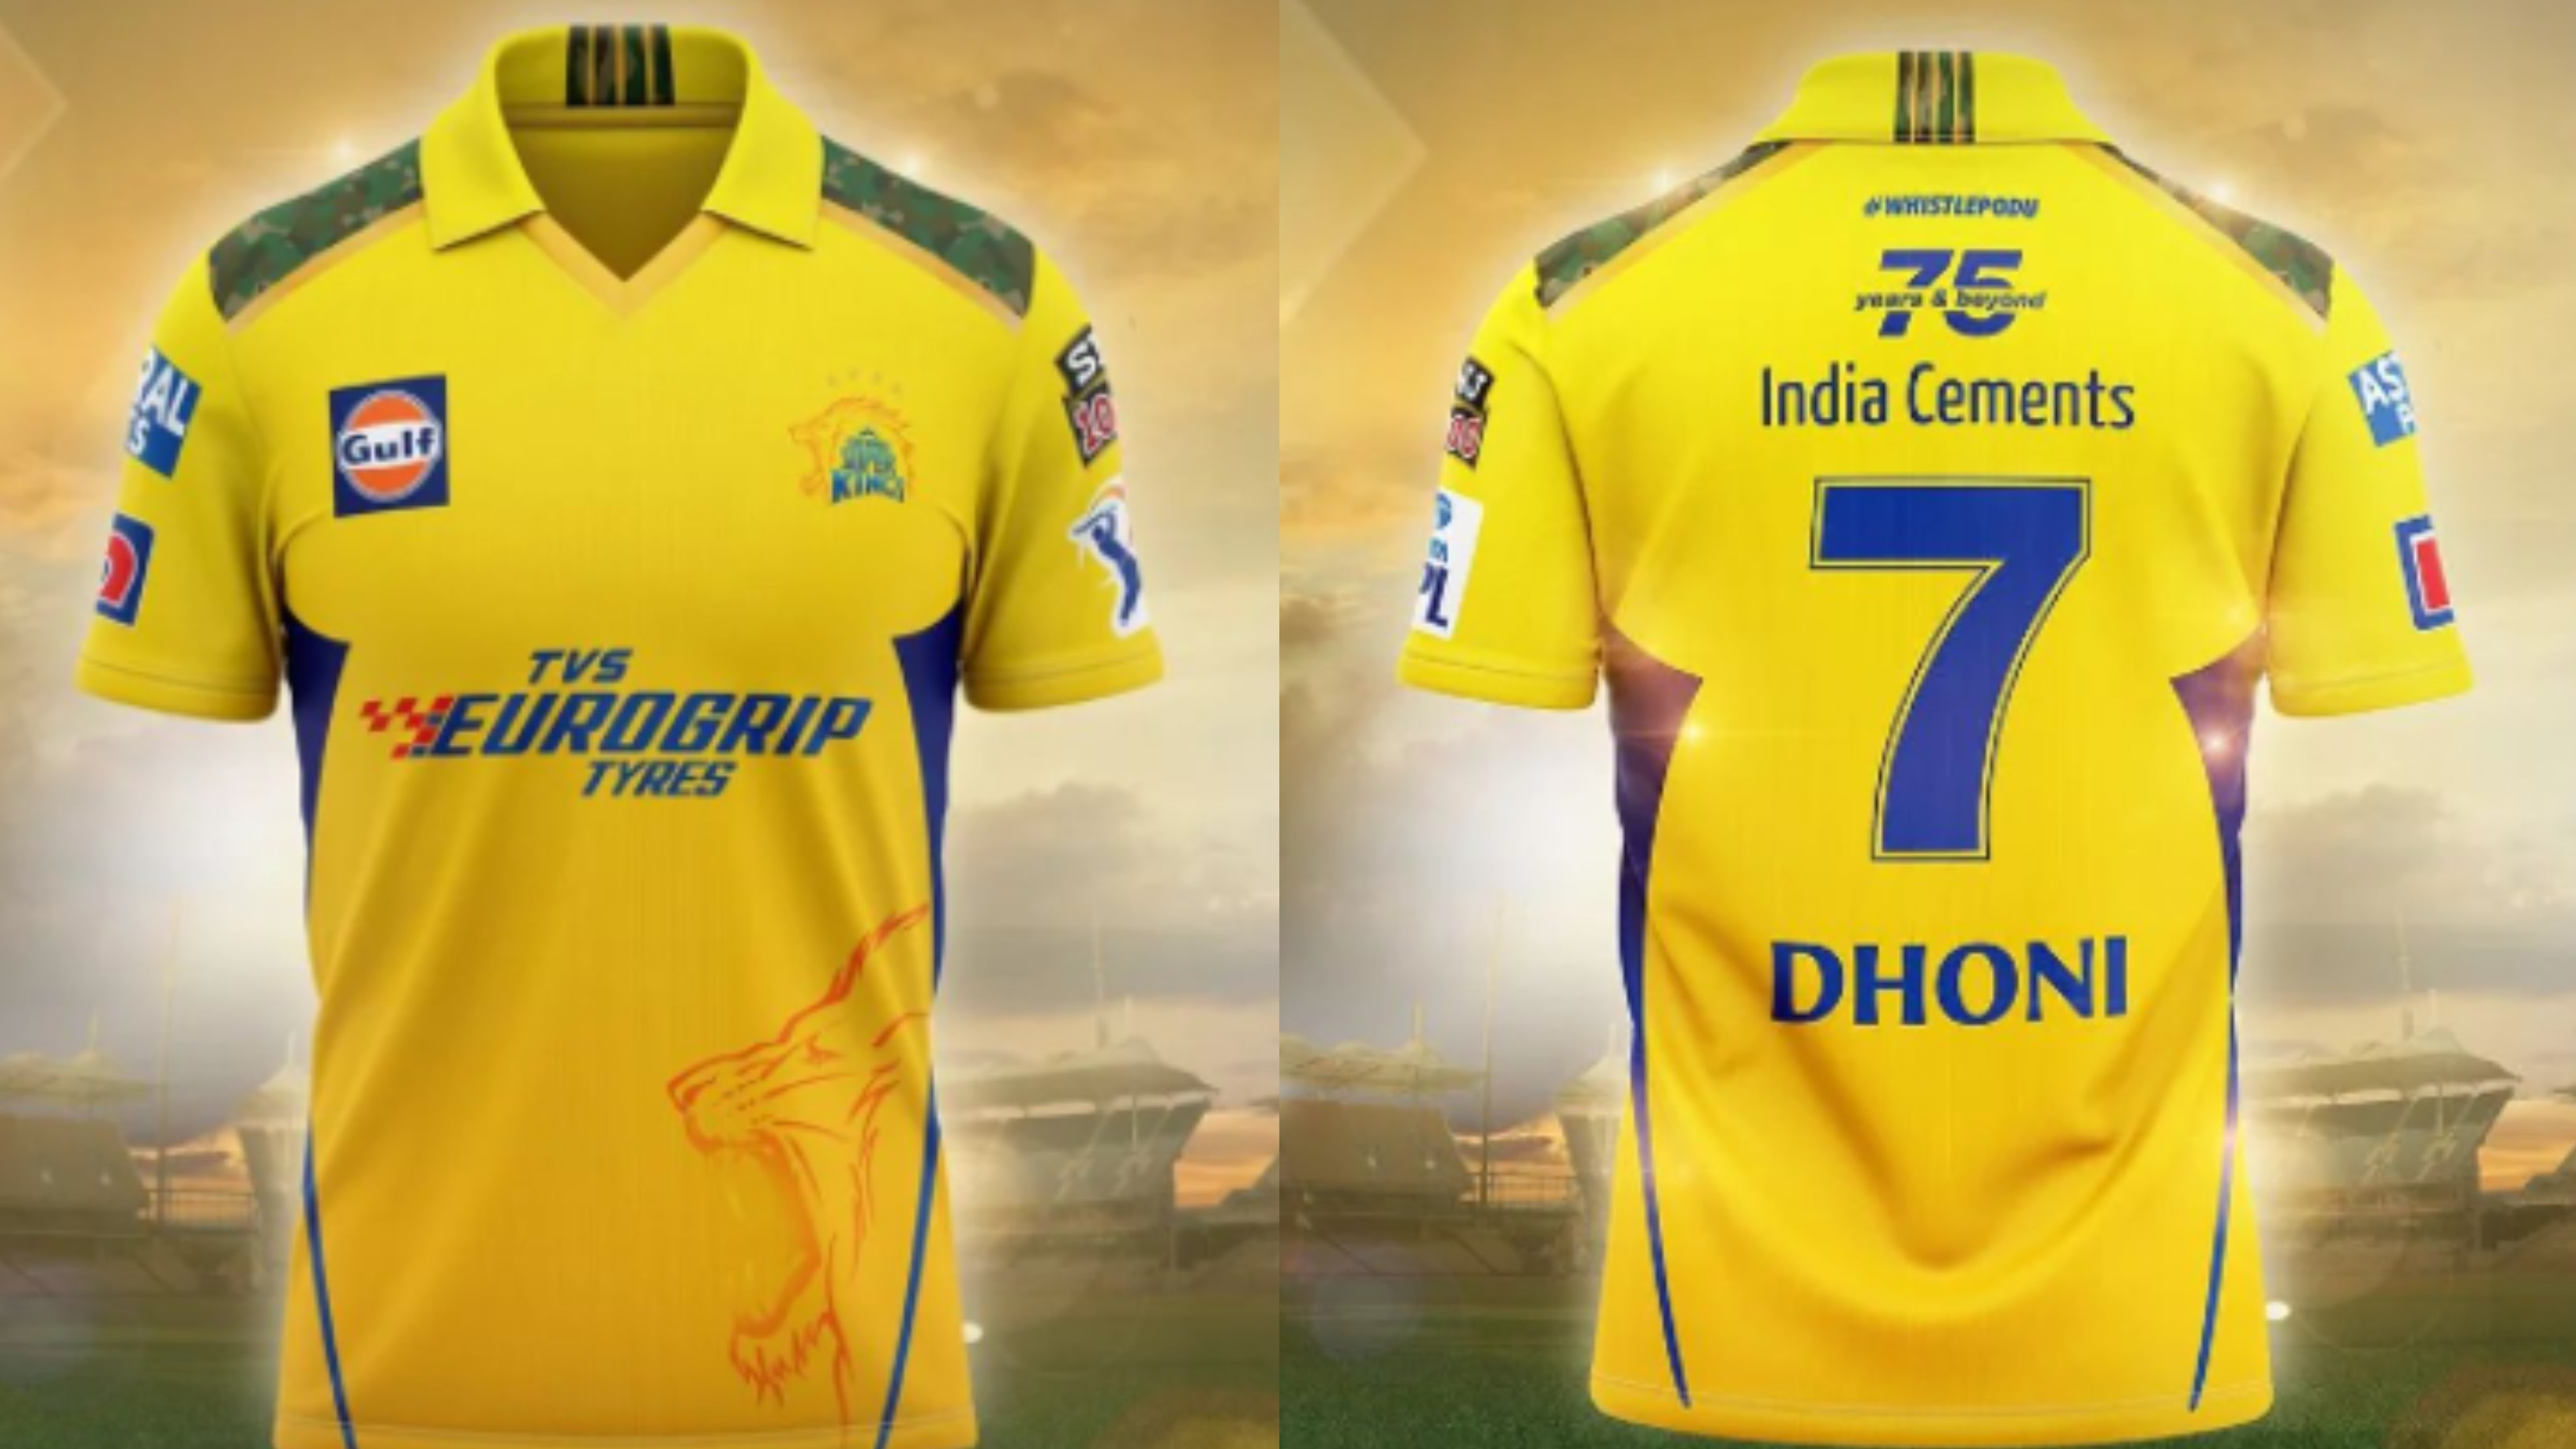 IPL 2022: WATCH – CSK unveil their jersey with new sponsor for upcoming IPL season